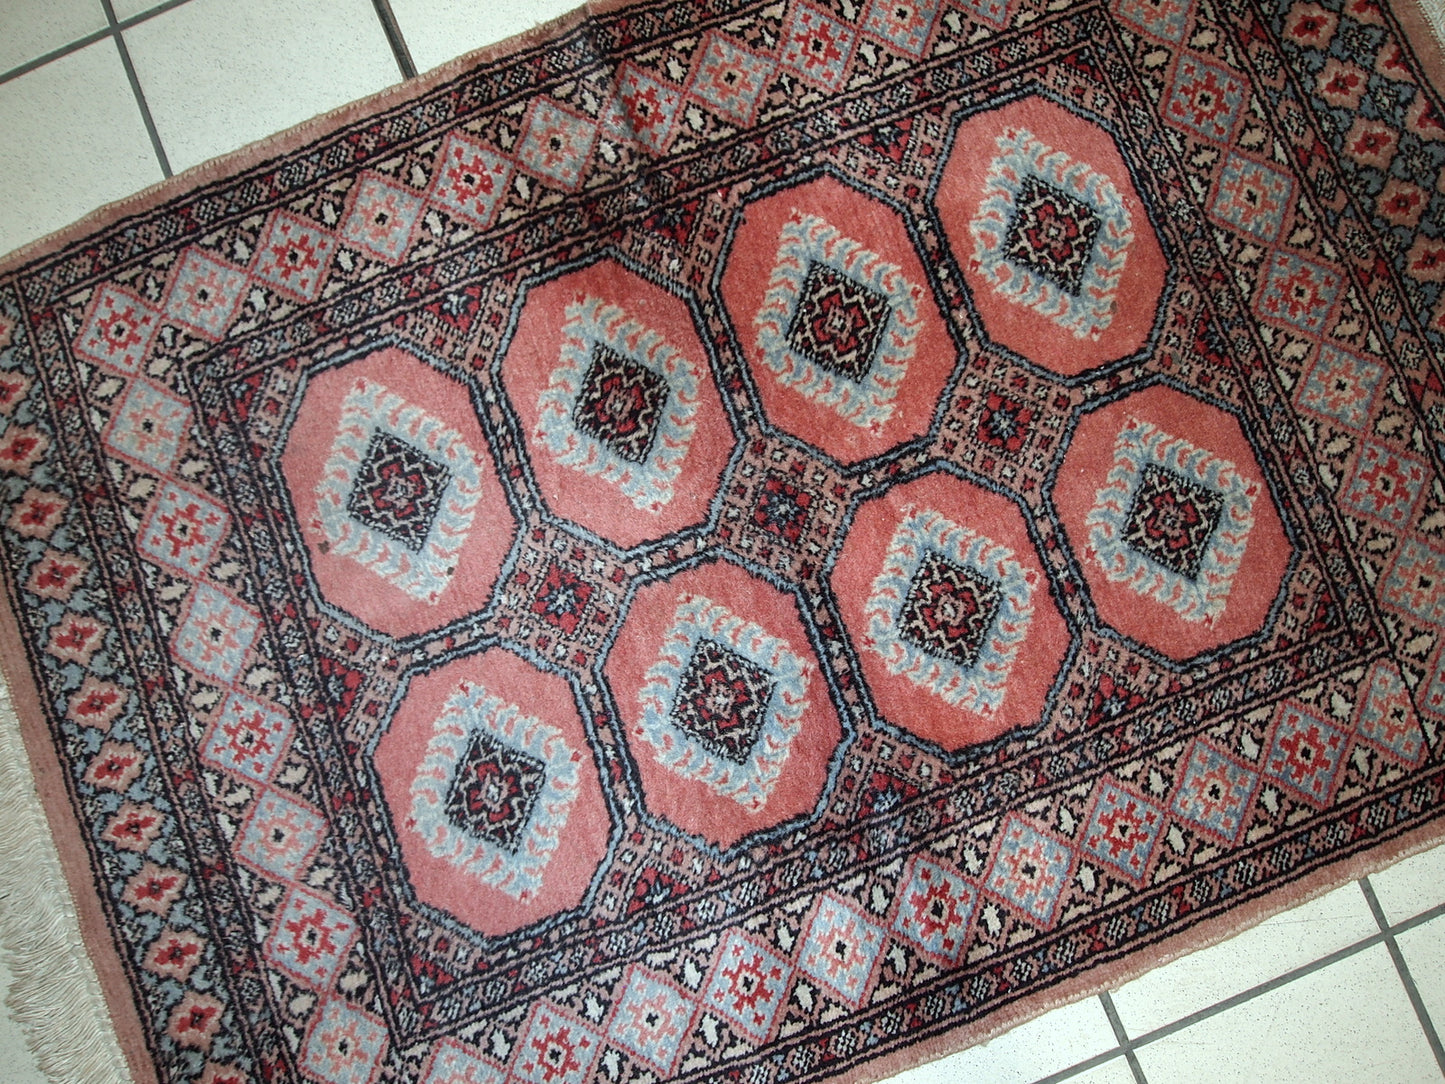 Handmade vintage Uzbek rug in pink and sky blue wool. It has been made in the middle of 20th century in Central Asia.